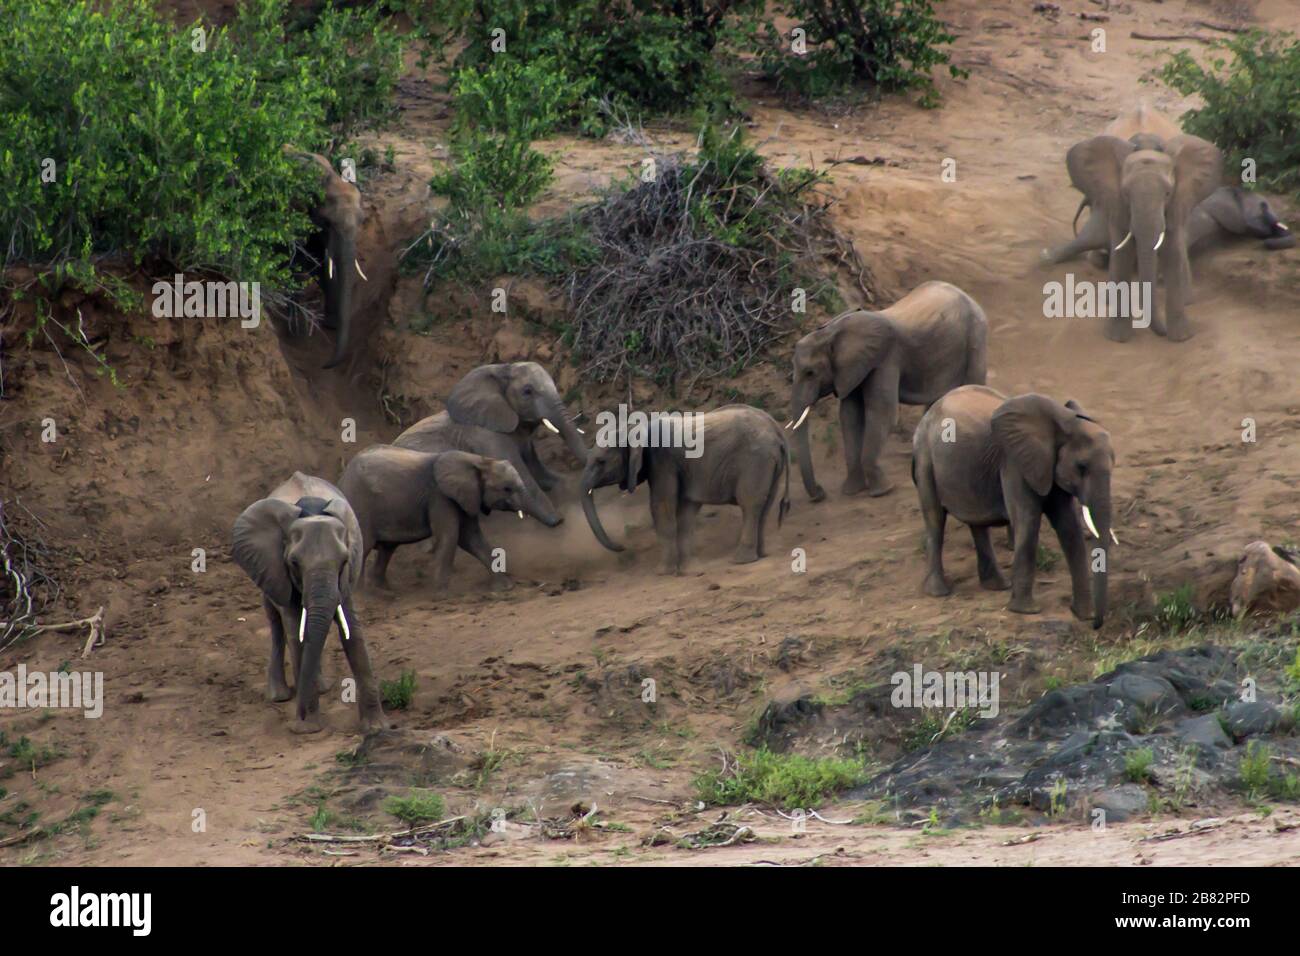 A small herd of African elephants (Loxodonta africana) descending a steep sand bank to go and have an afternoon drink at the river below Stock Photo